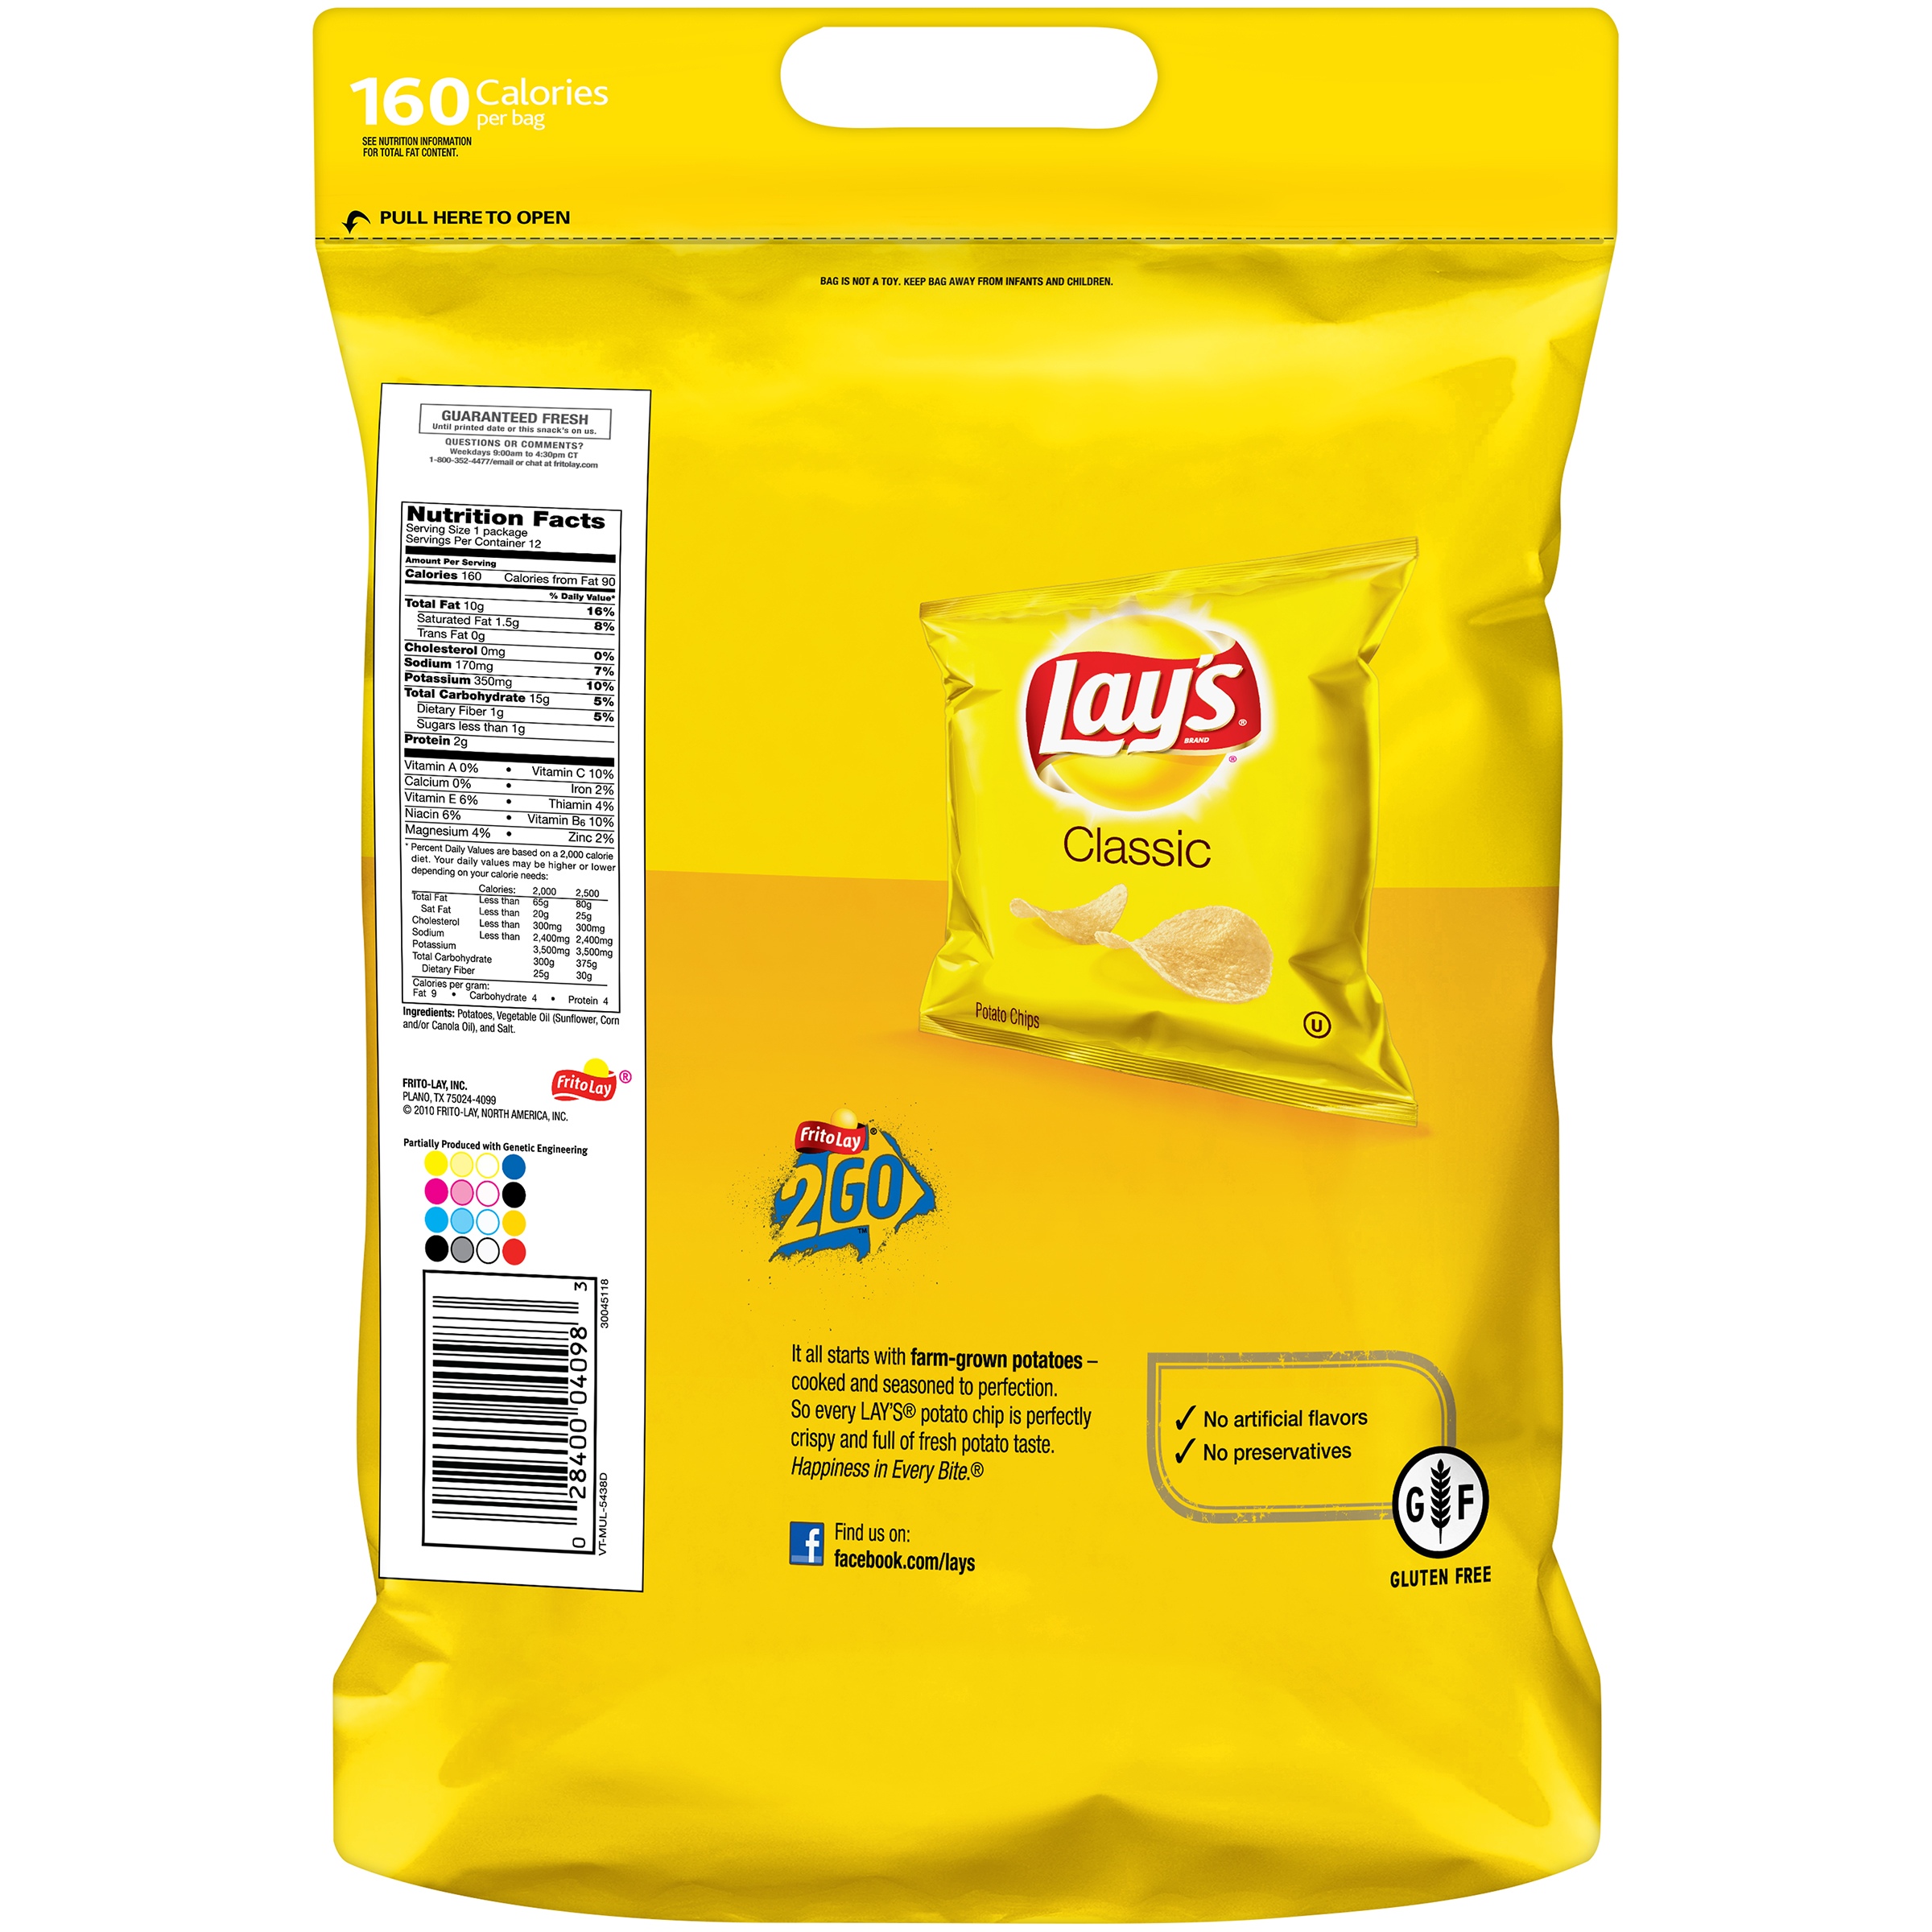 Lay's Classic Potato Chips, 12 count, 1 oz Bags - image 2 of 5